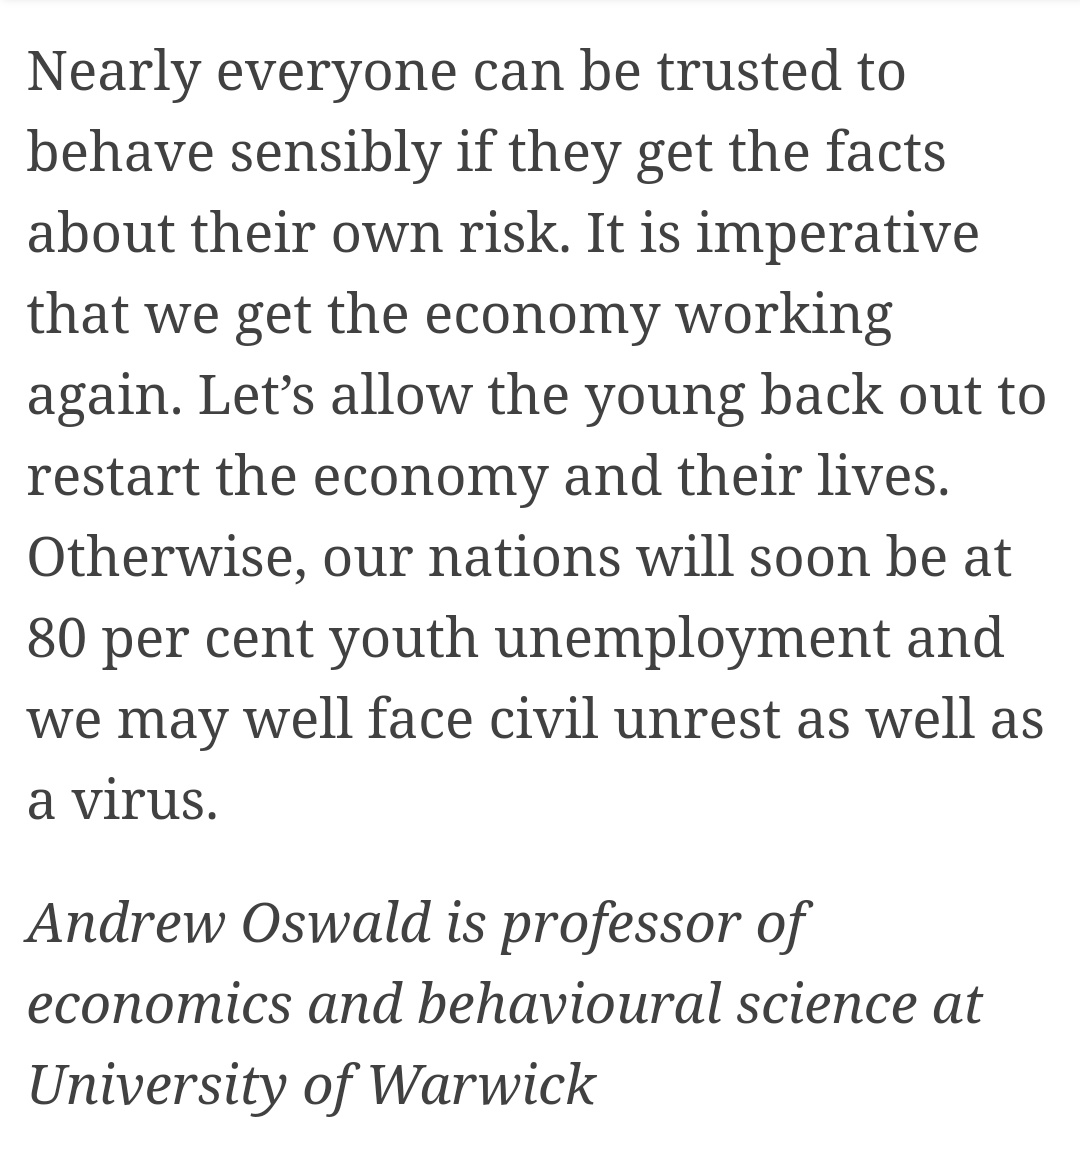 This nonsense printed in the IT as an opinion piece by Andrew Oswald is as stupid and dangerous as anything by anti vaxxers and 5Gers. It has no basis in real science. Behavourial economics is public health what Q Anon truthers are to enlightened thought.